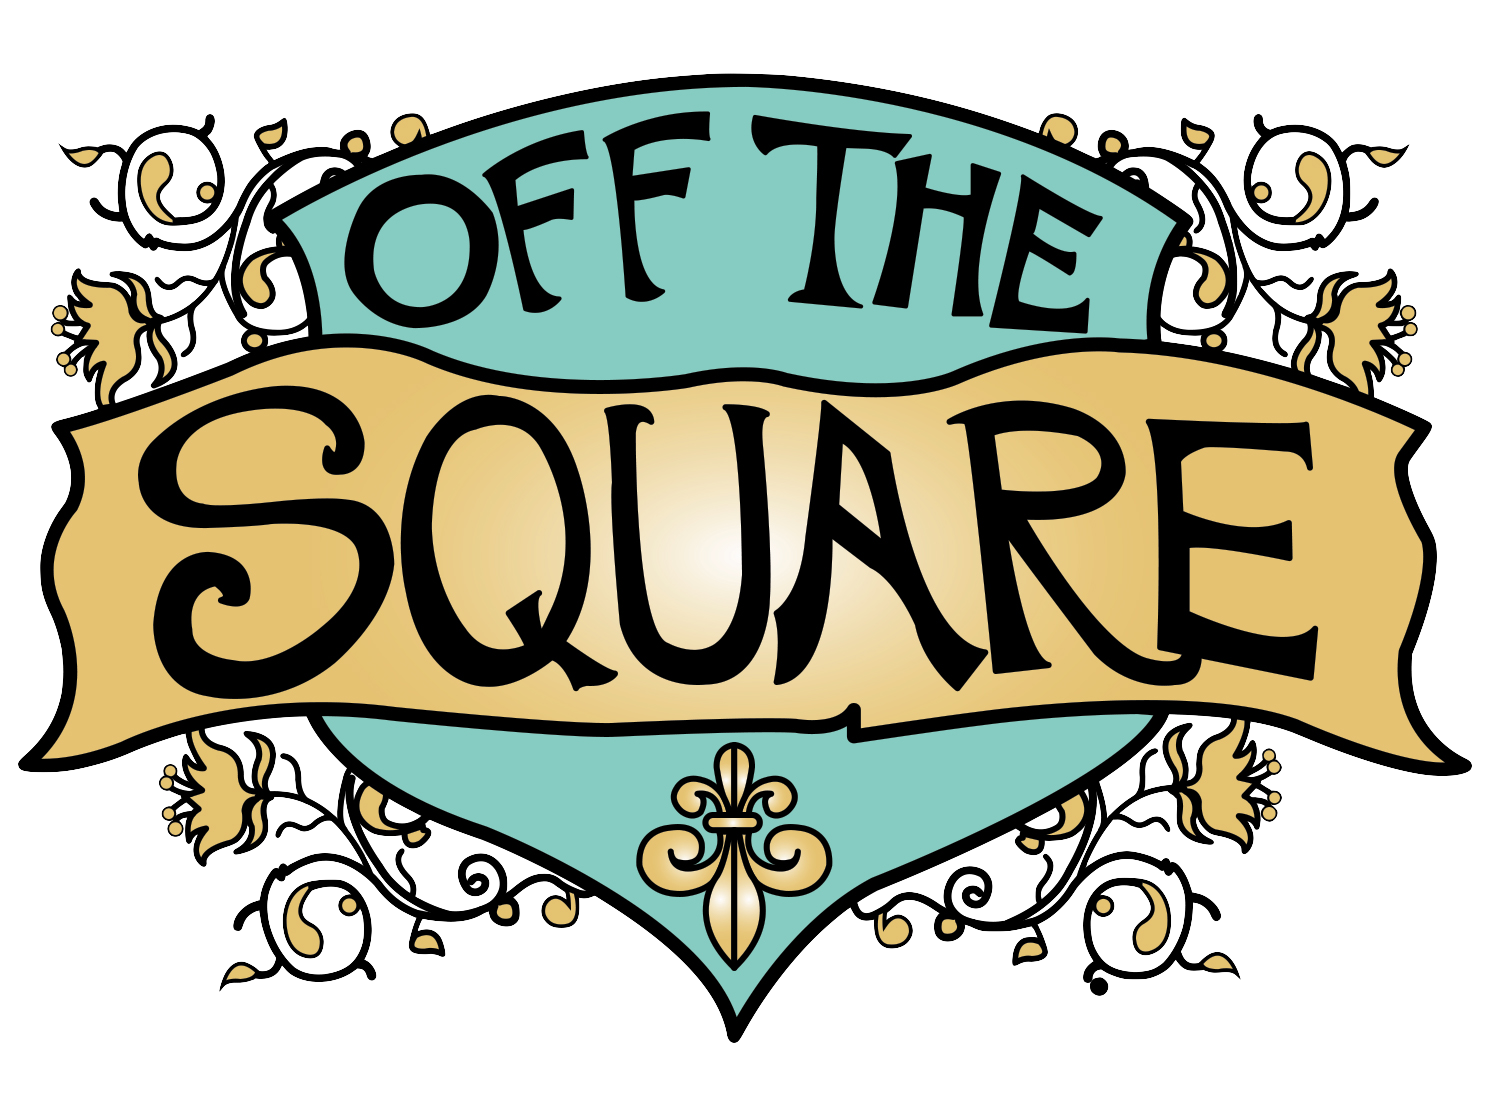 Off the square. Luncheon clipart lunch club